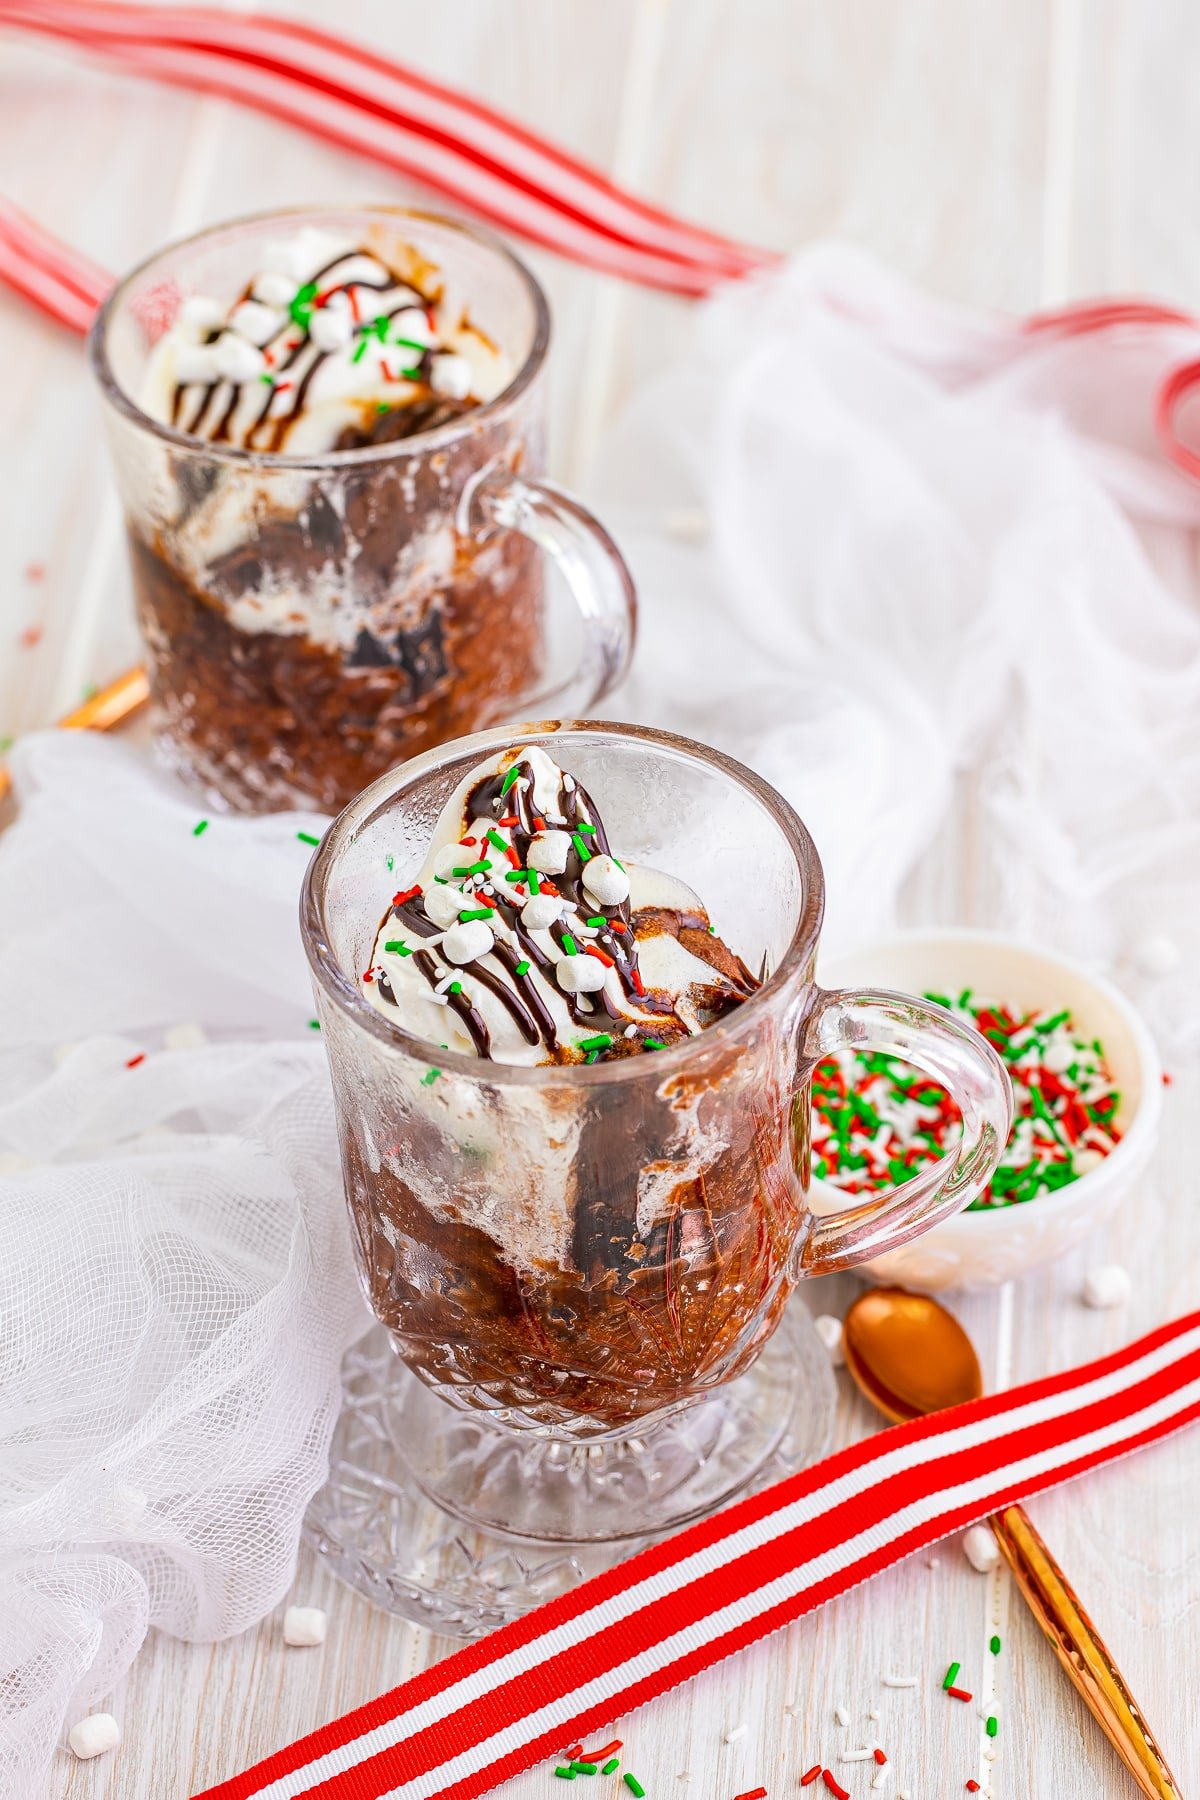 Two Hot Chocolate Mug Cakes in glasses.